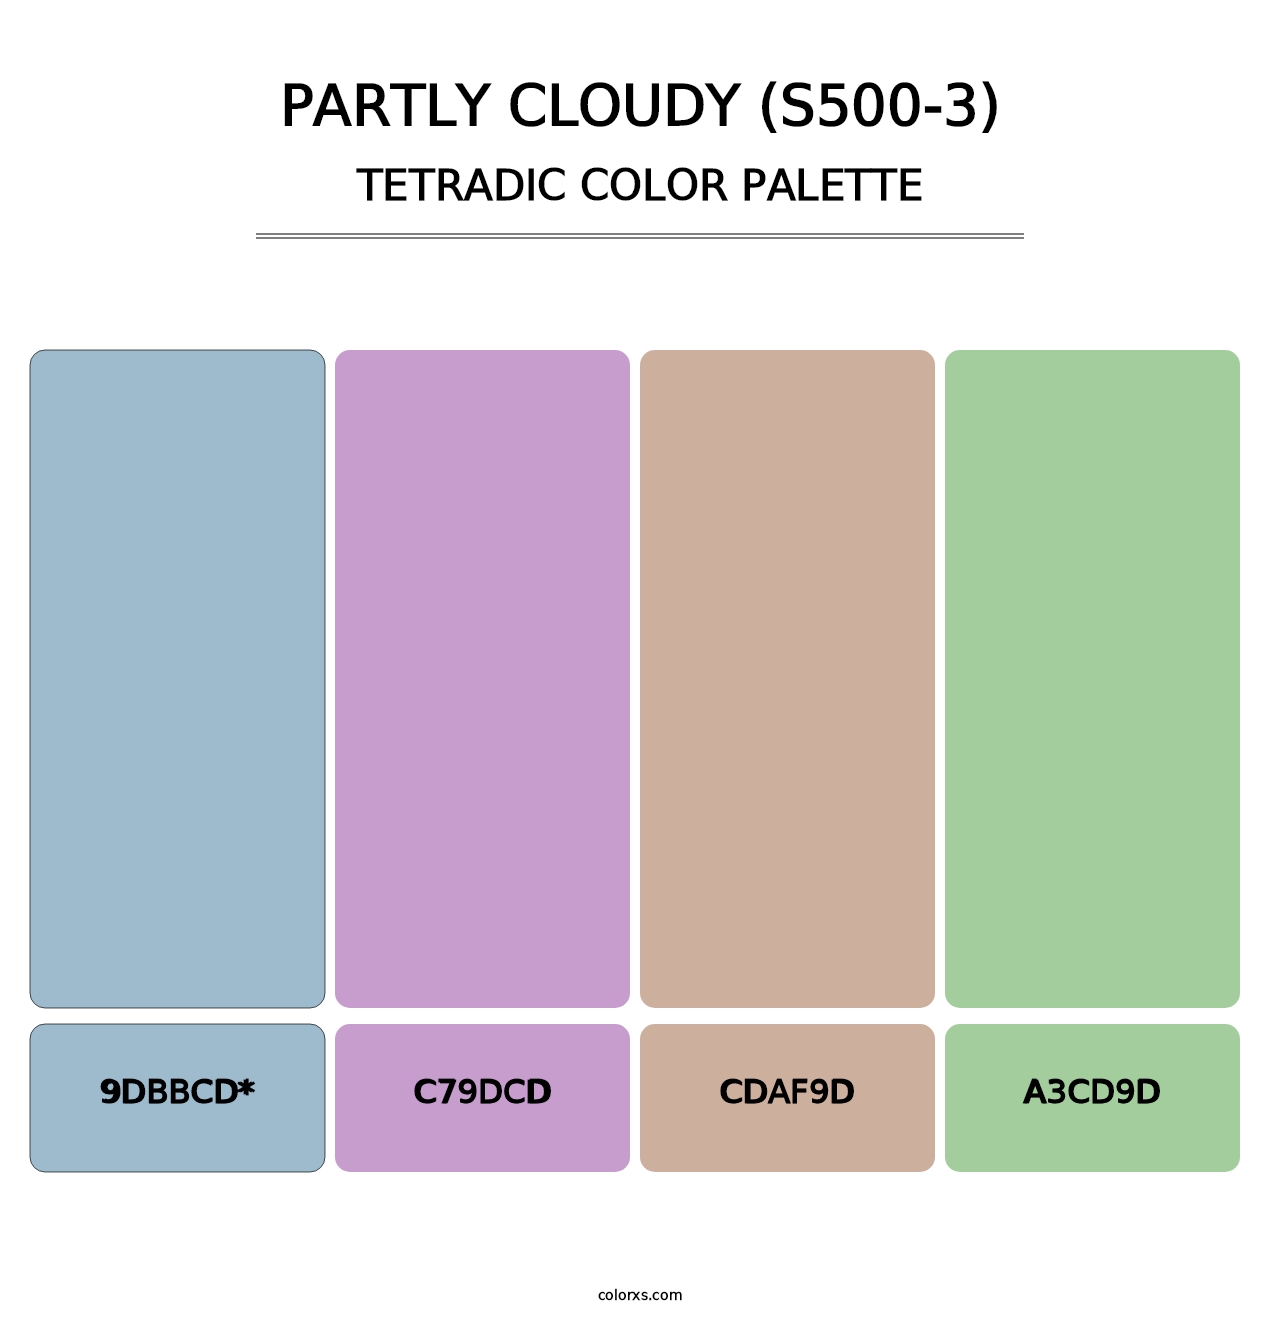 Partly Cloudy (S500-3) - Tetradic Color Palette